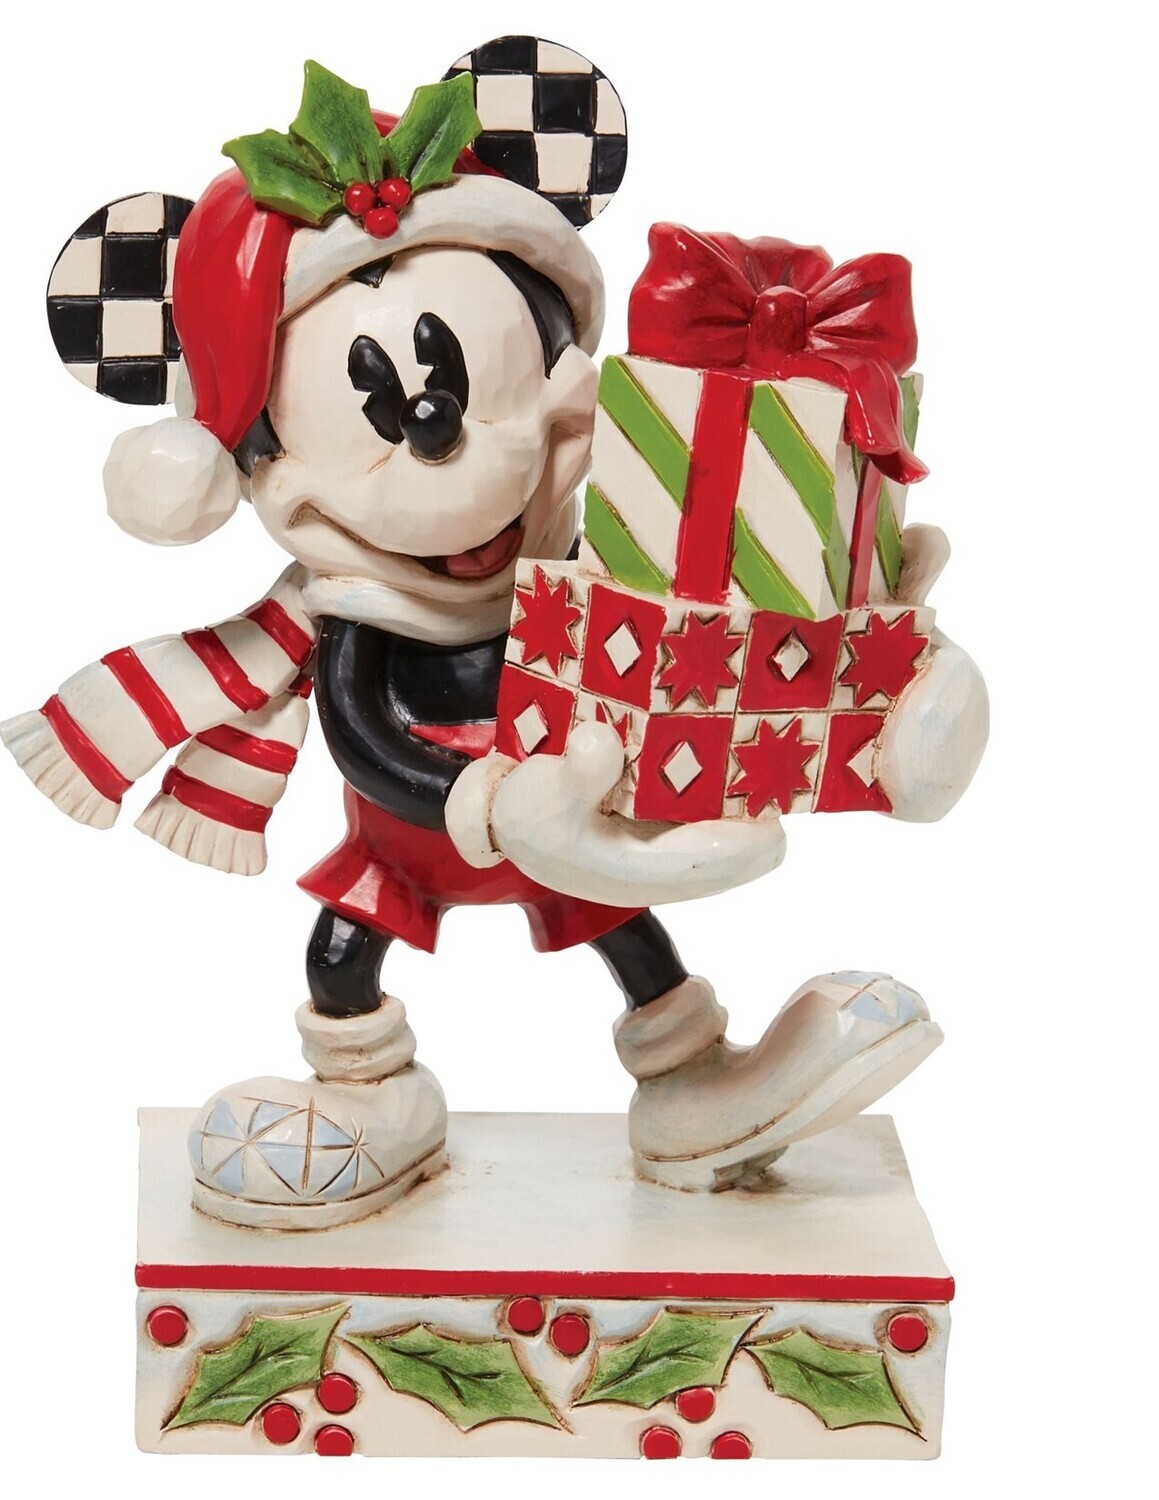 Jim Shore Disney Traditions "Mickey with Stacked Presents" (6010869)